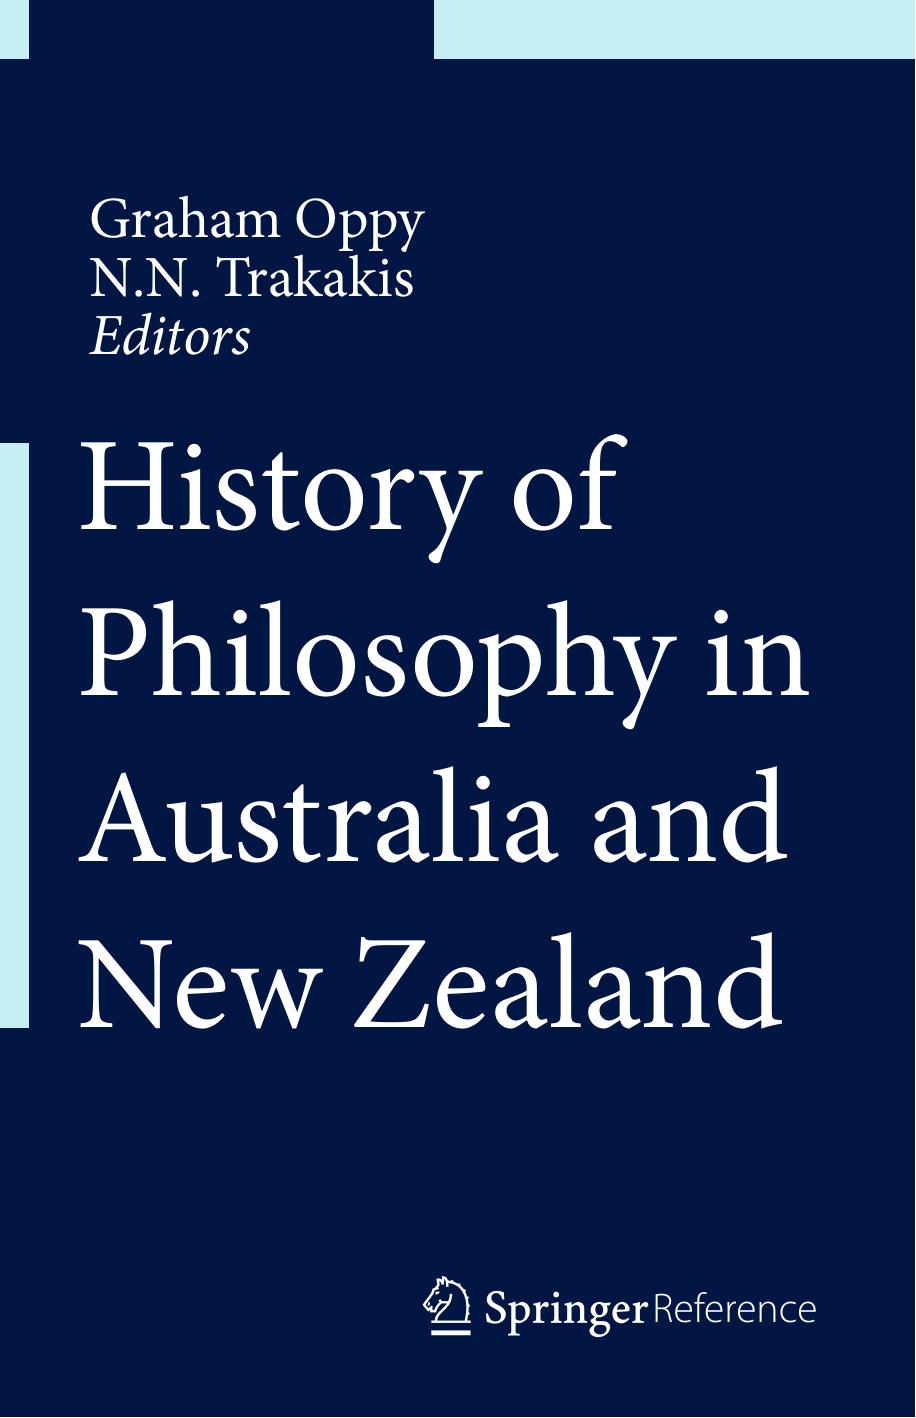 History of Philosophy in Australia and New Zealand